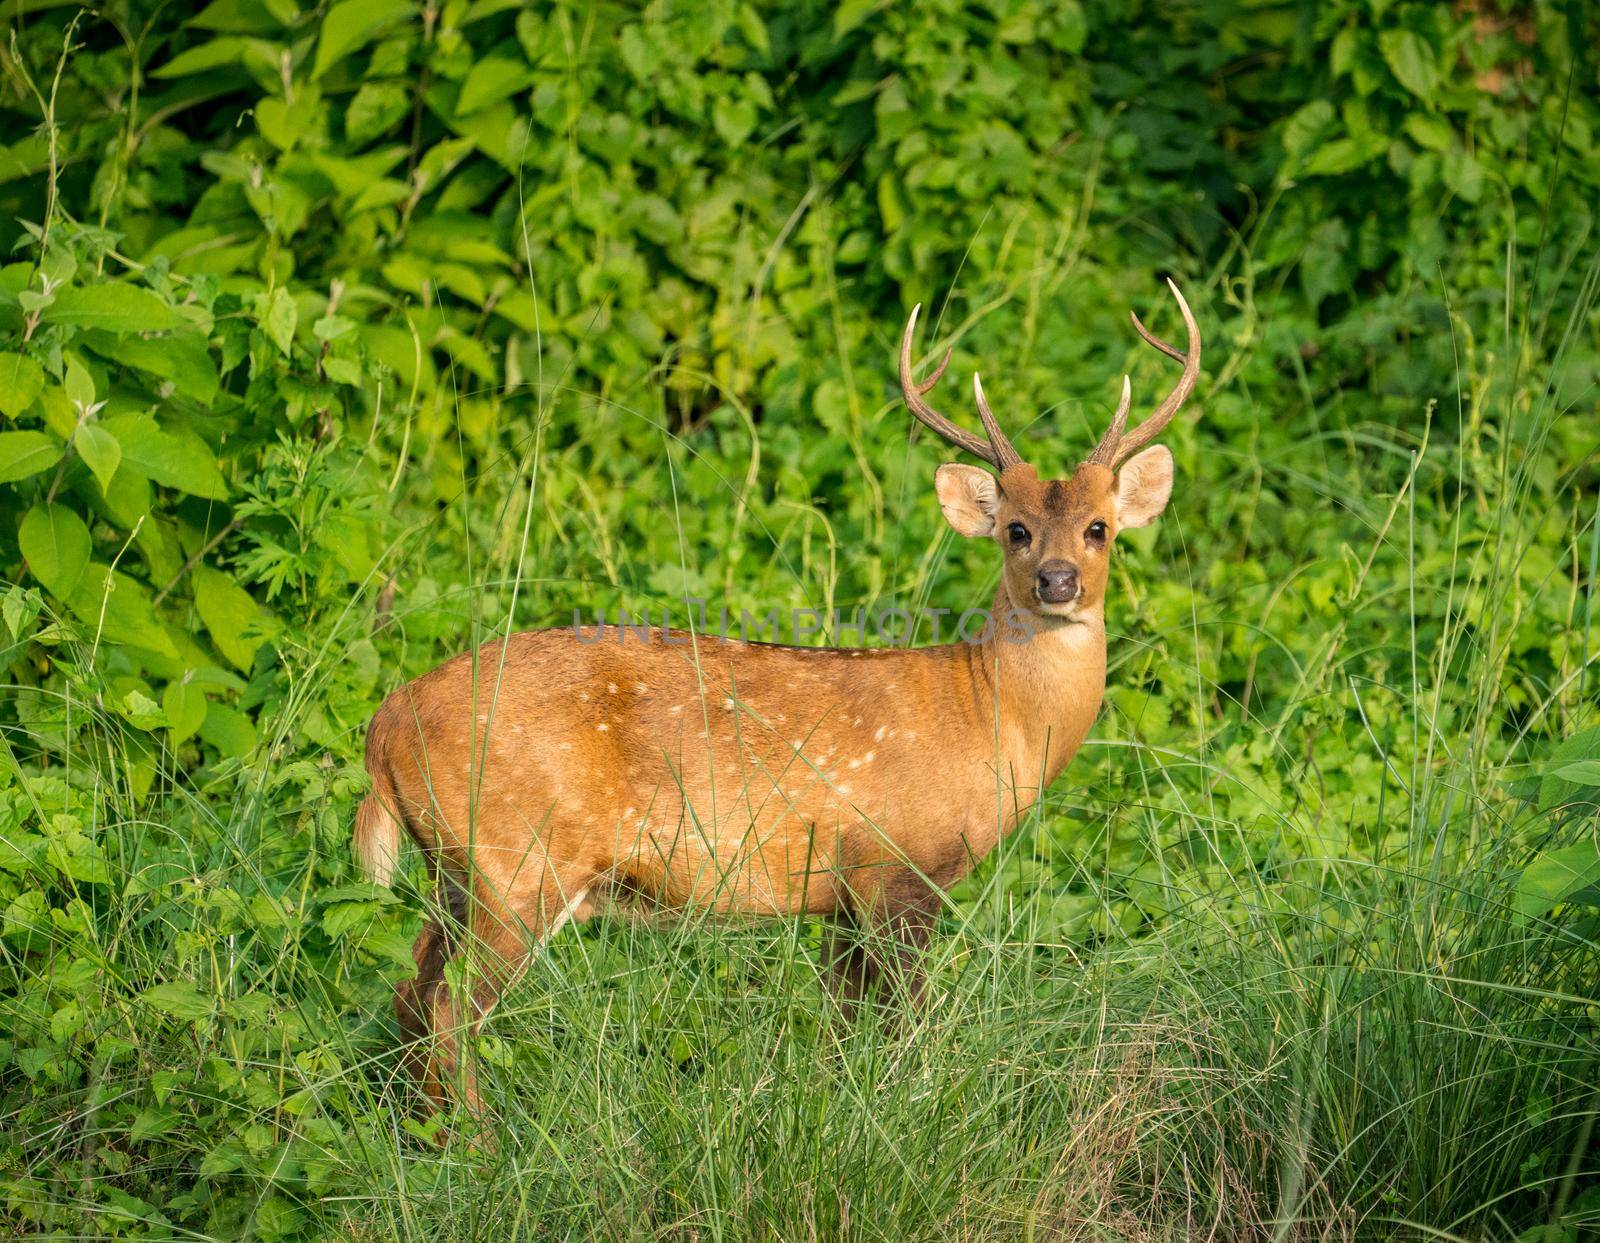 spotted or sika deer in the jungle by Arsgera